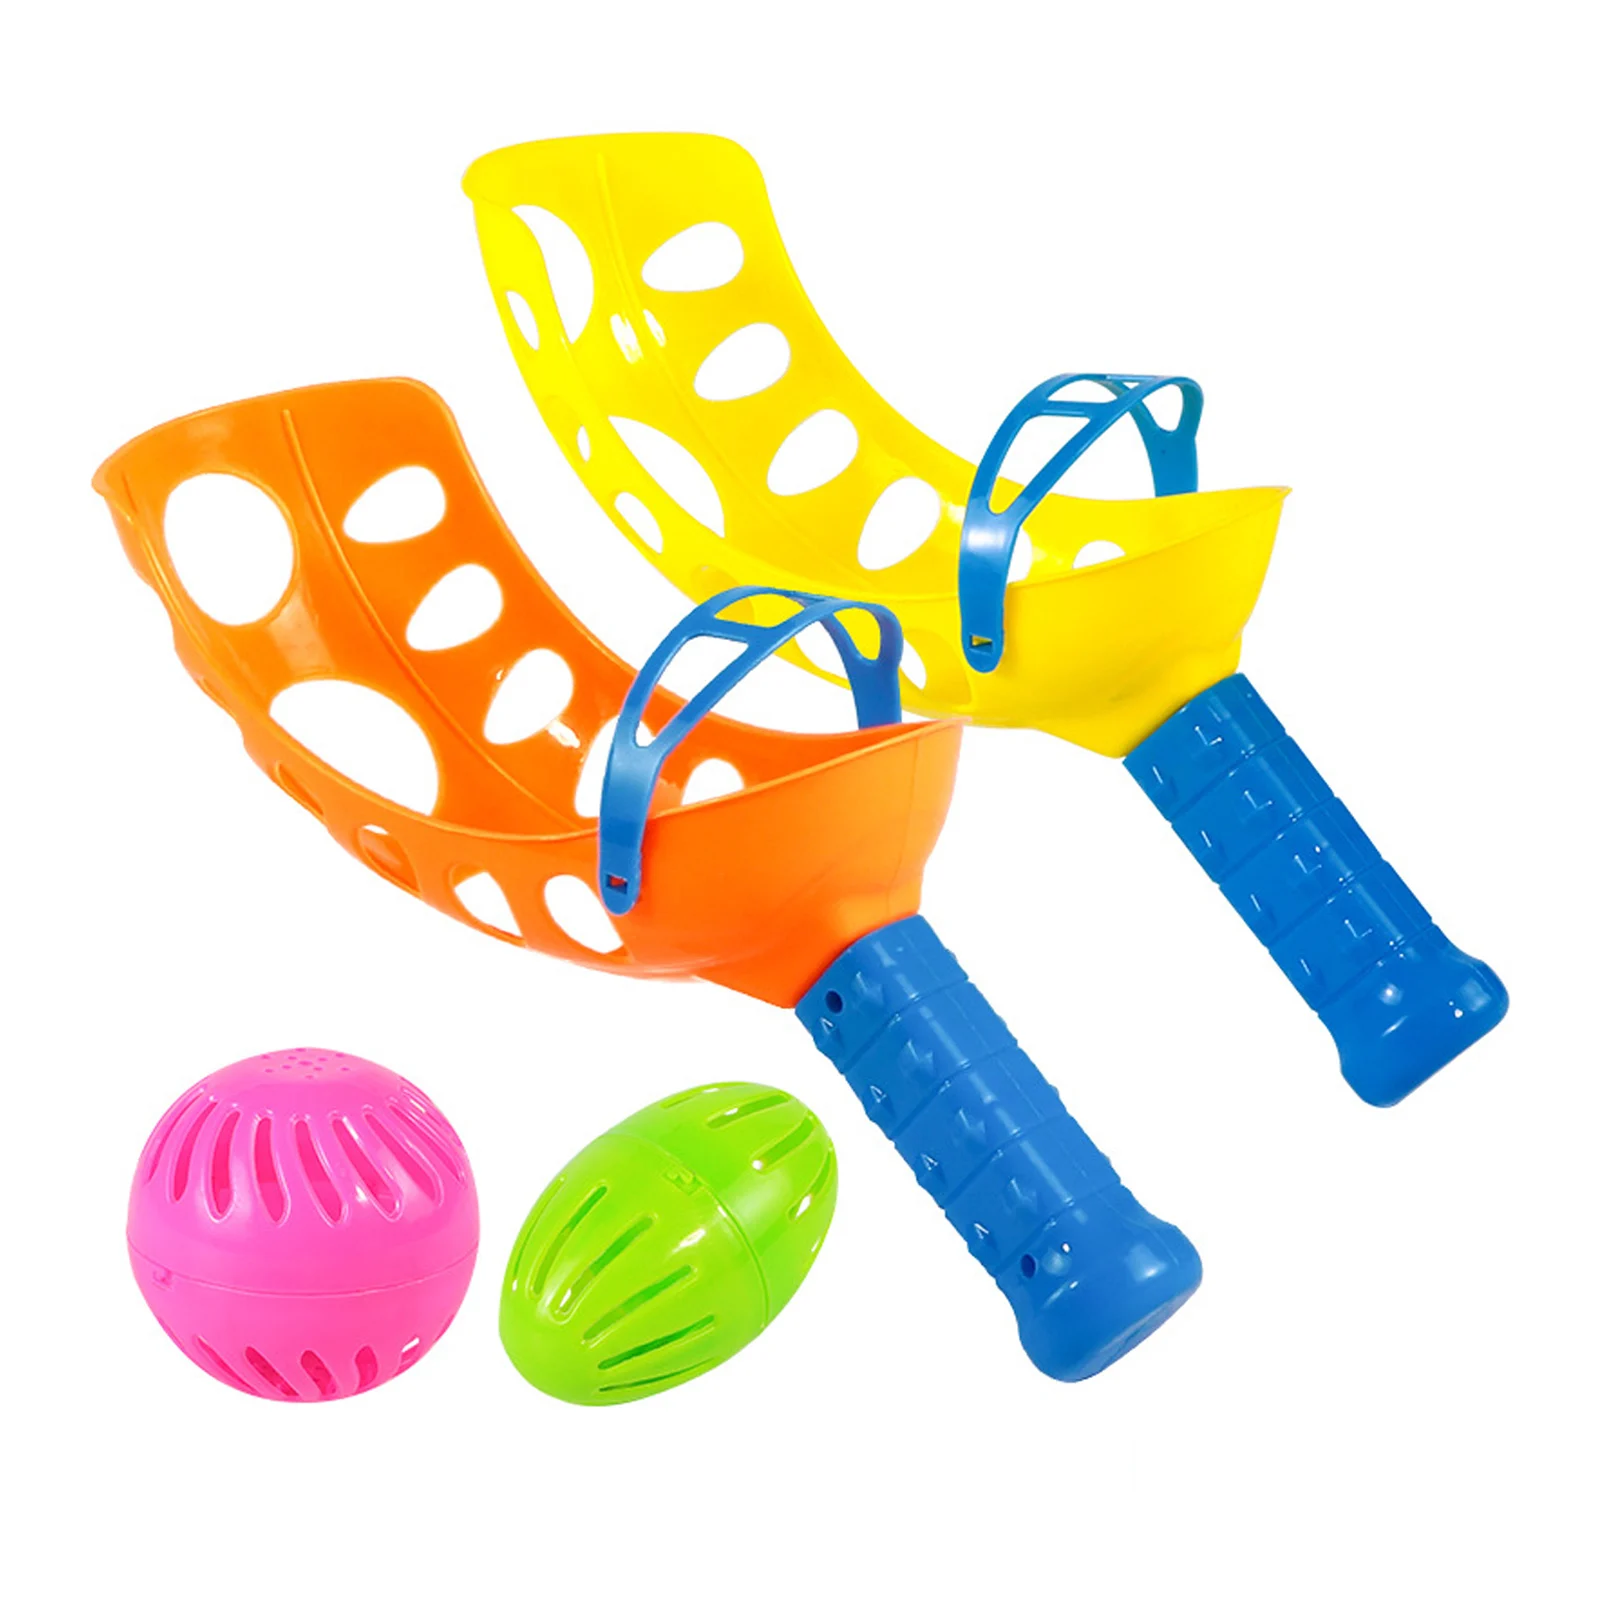 

Scoop Ball Game Outdoor Toys With 2 Scoops And 2 Perforated Balls Fun Catch Game Toy For Outside Yard Camping Beach Park